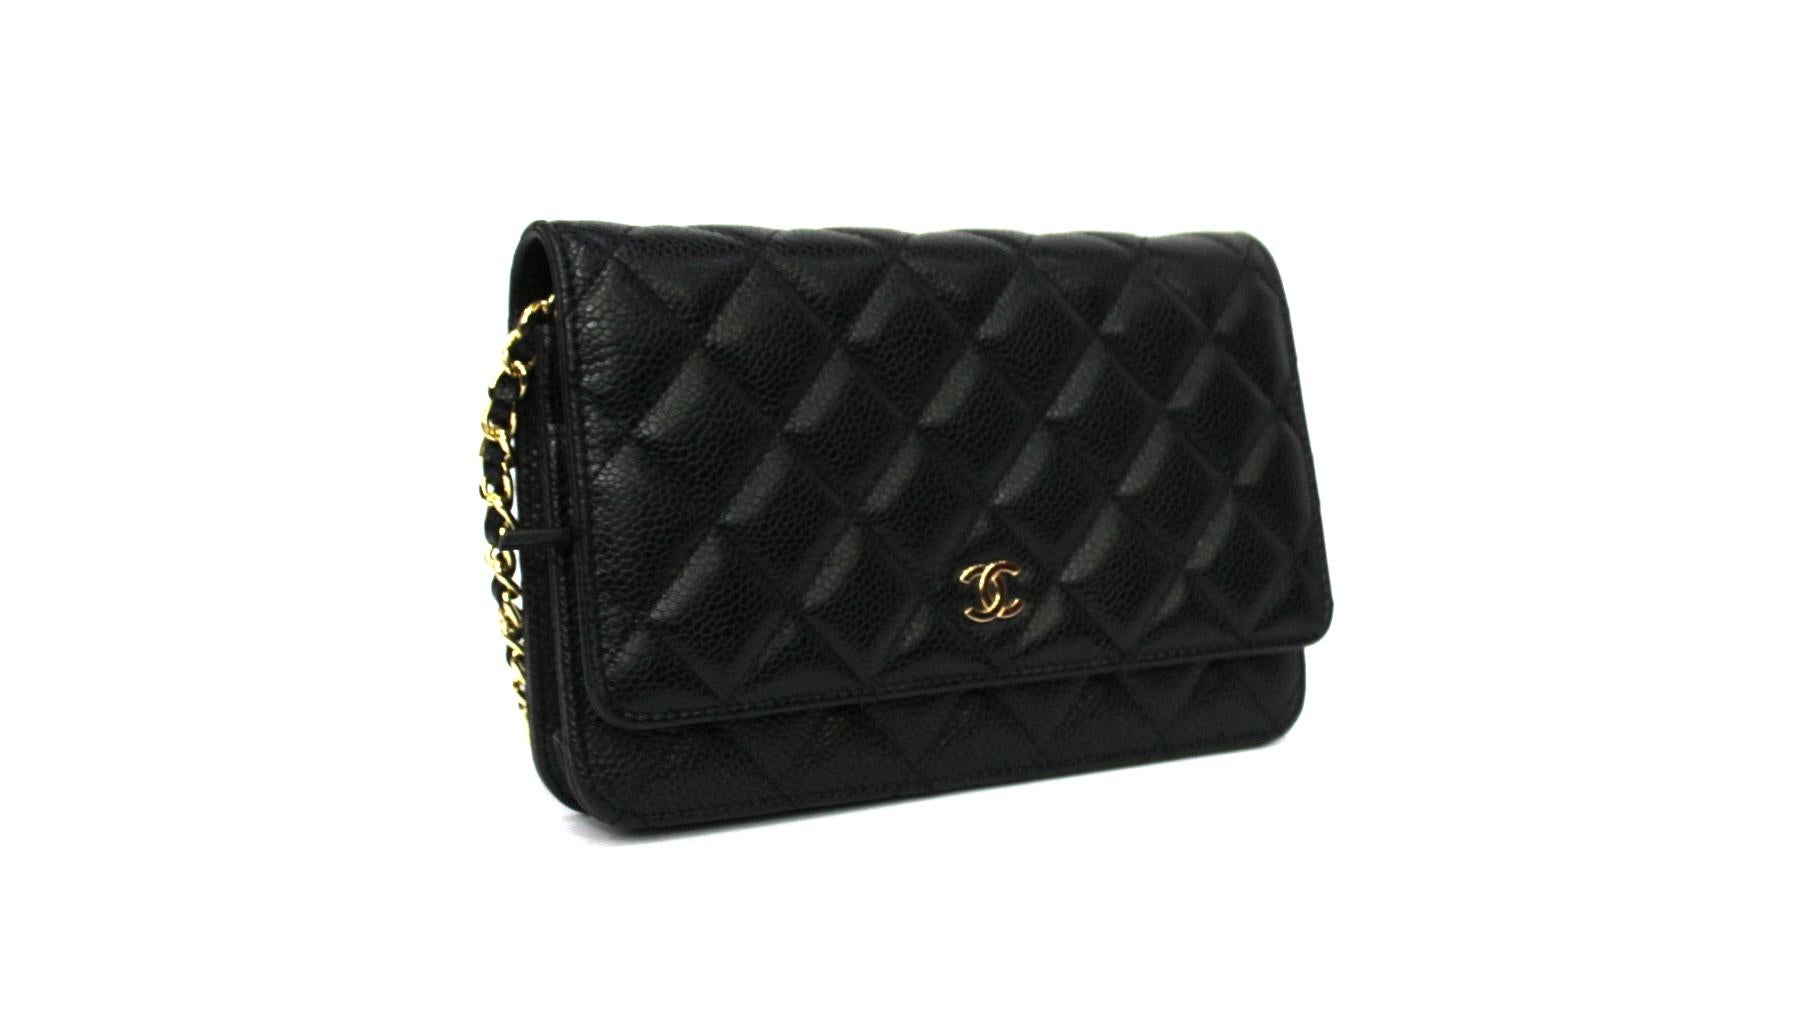 Chanel Wallet on Chain bag made of black textured leather with golden hardware.

Button closure, internally capacious for the essential.

The leather and chain shoulder strap allows it to be worn on the shoulder and across the shoulder,

it can also